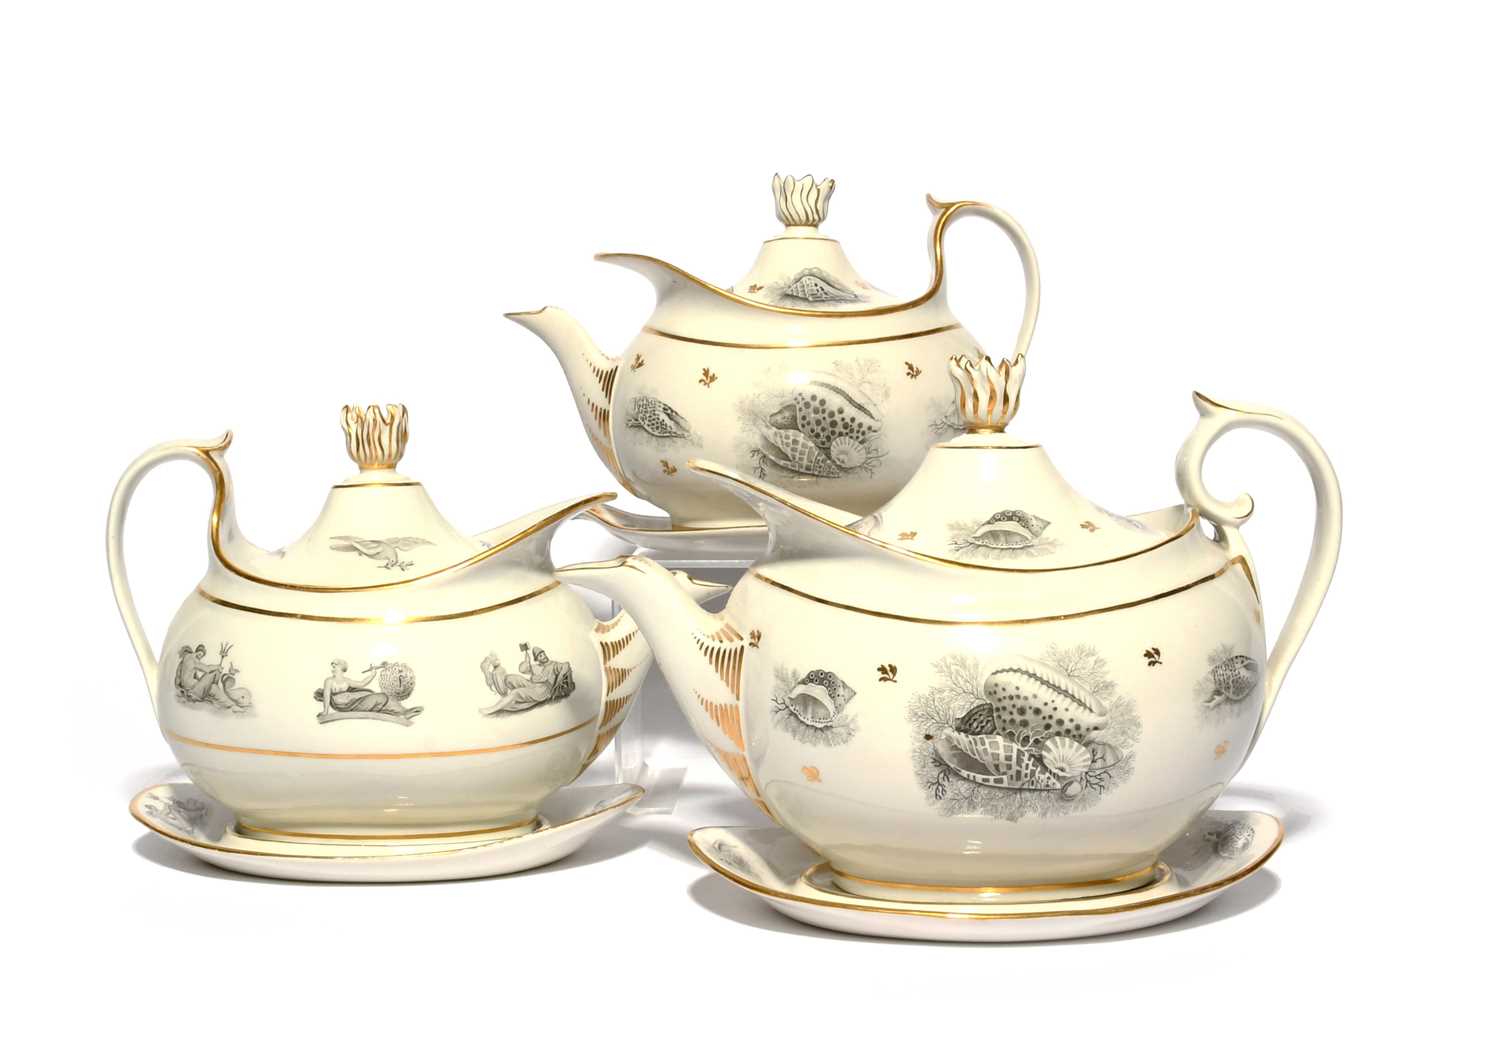 Three Barr Flight and Barr (Worcester) teapots with covers and stands, c.1810, bat printed in black,